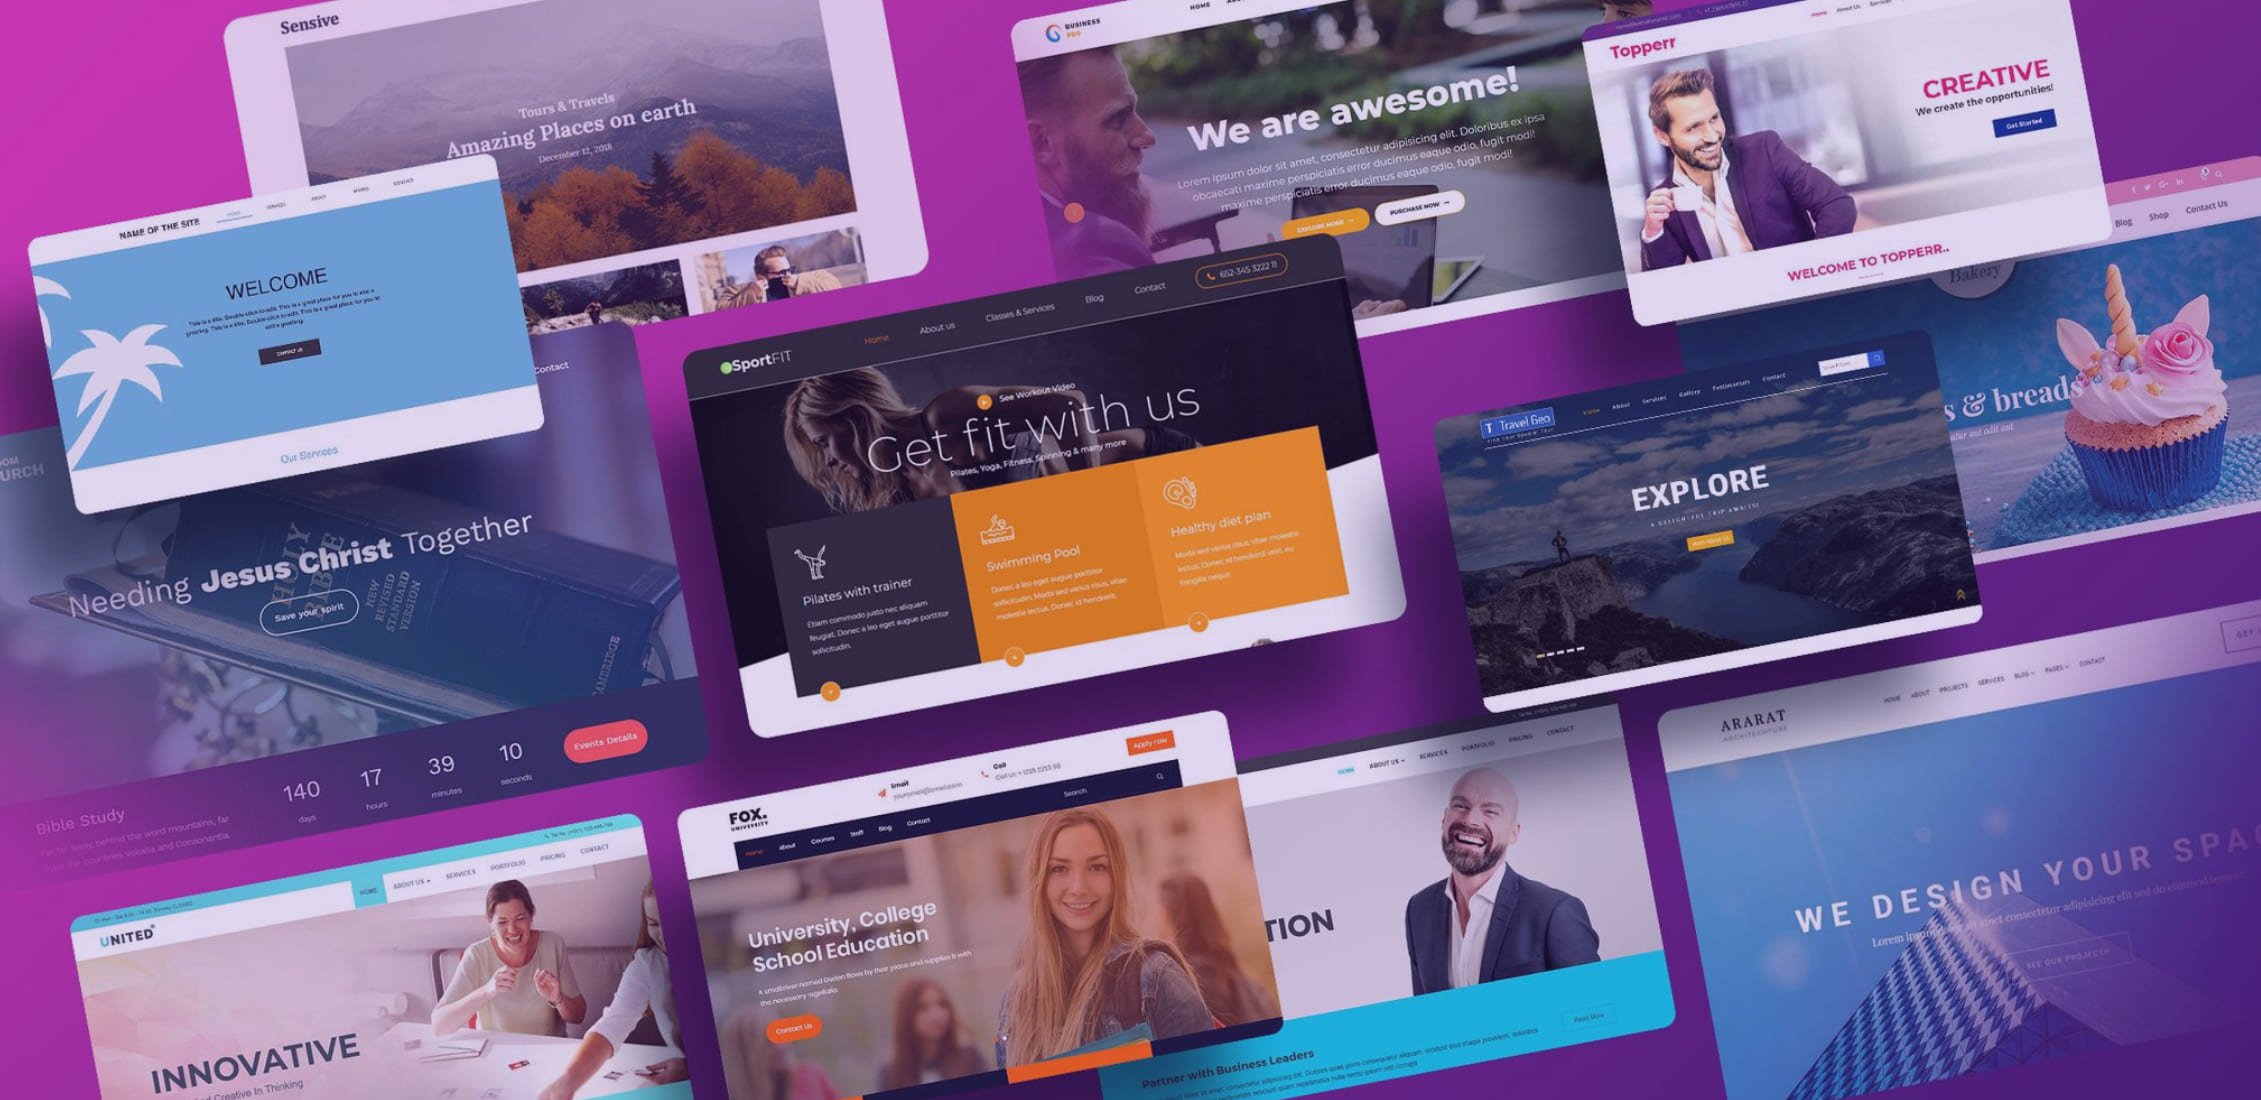 20+ Best Website Templates for Small Business in 20  [MB] Regarding Website Templates For Small Business